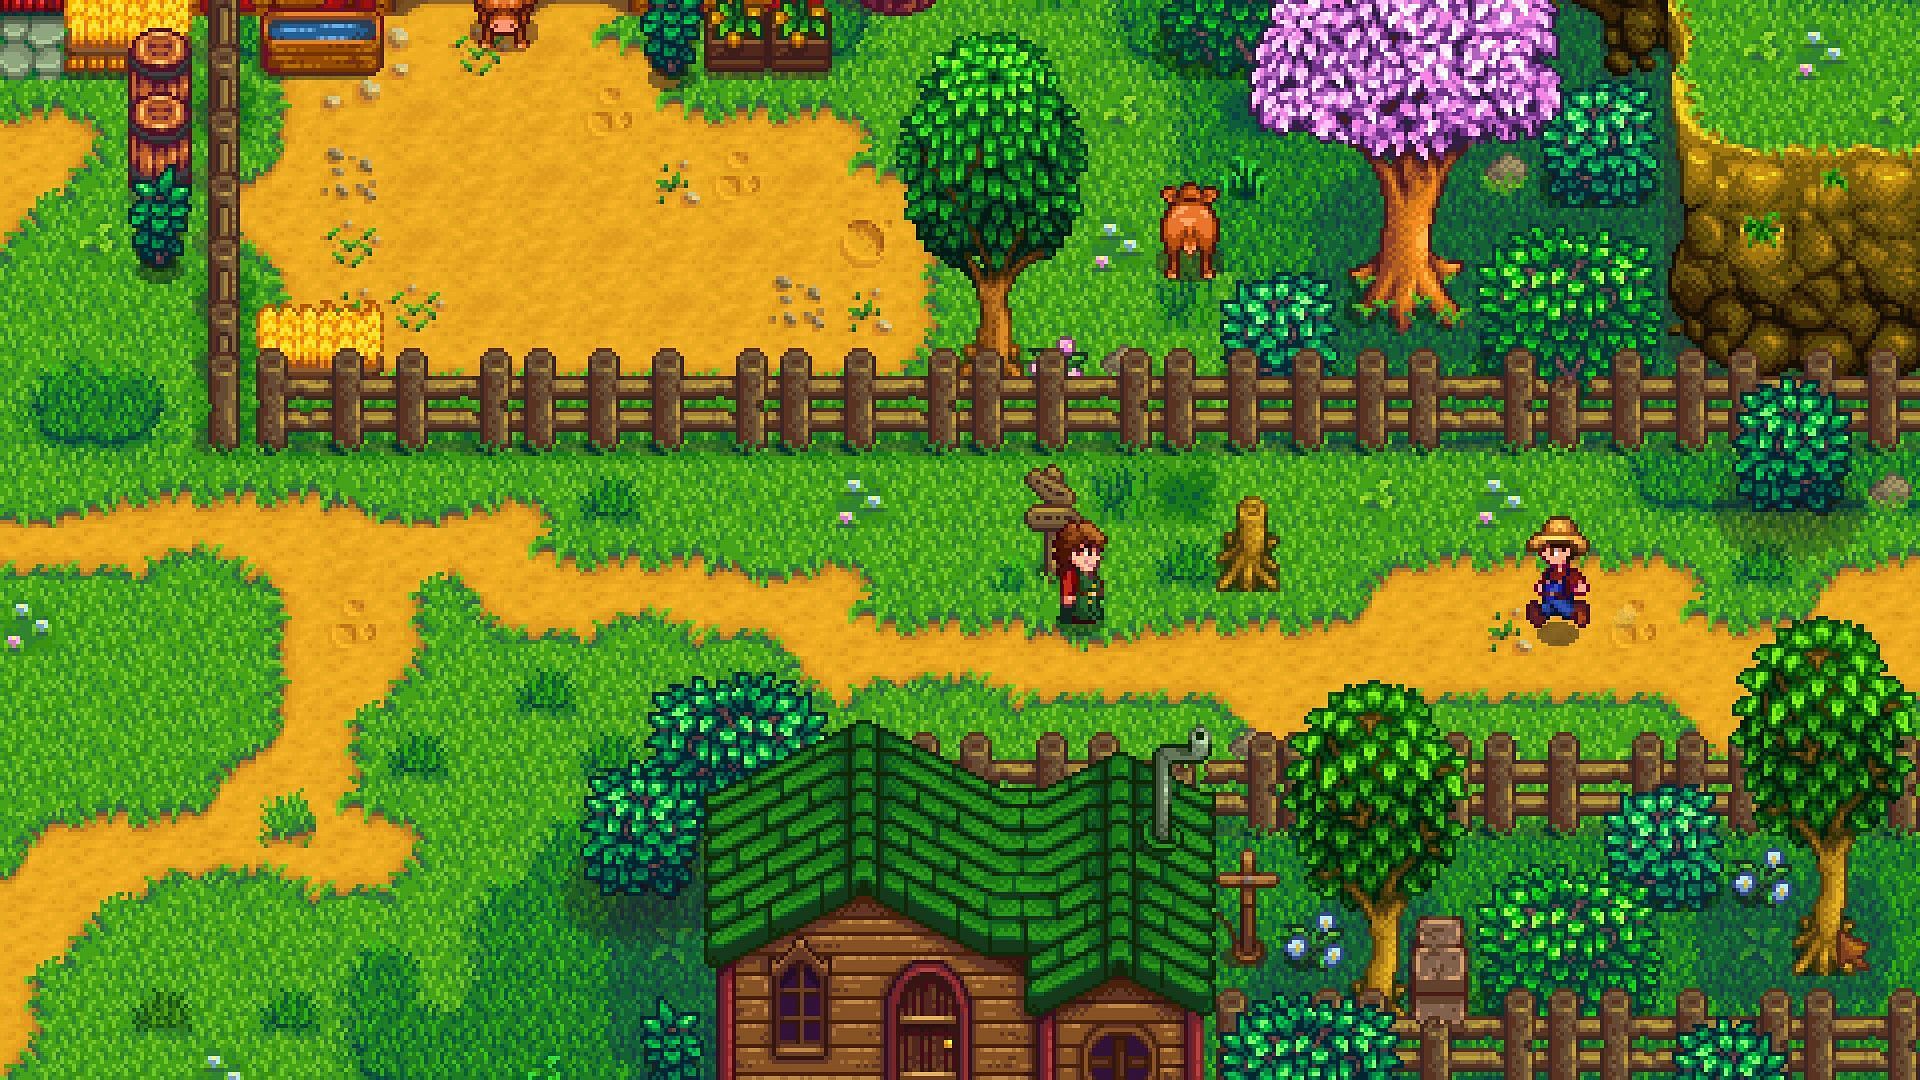 Stardew Valley official image (Image via Steam)